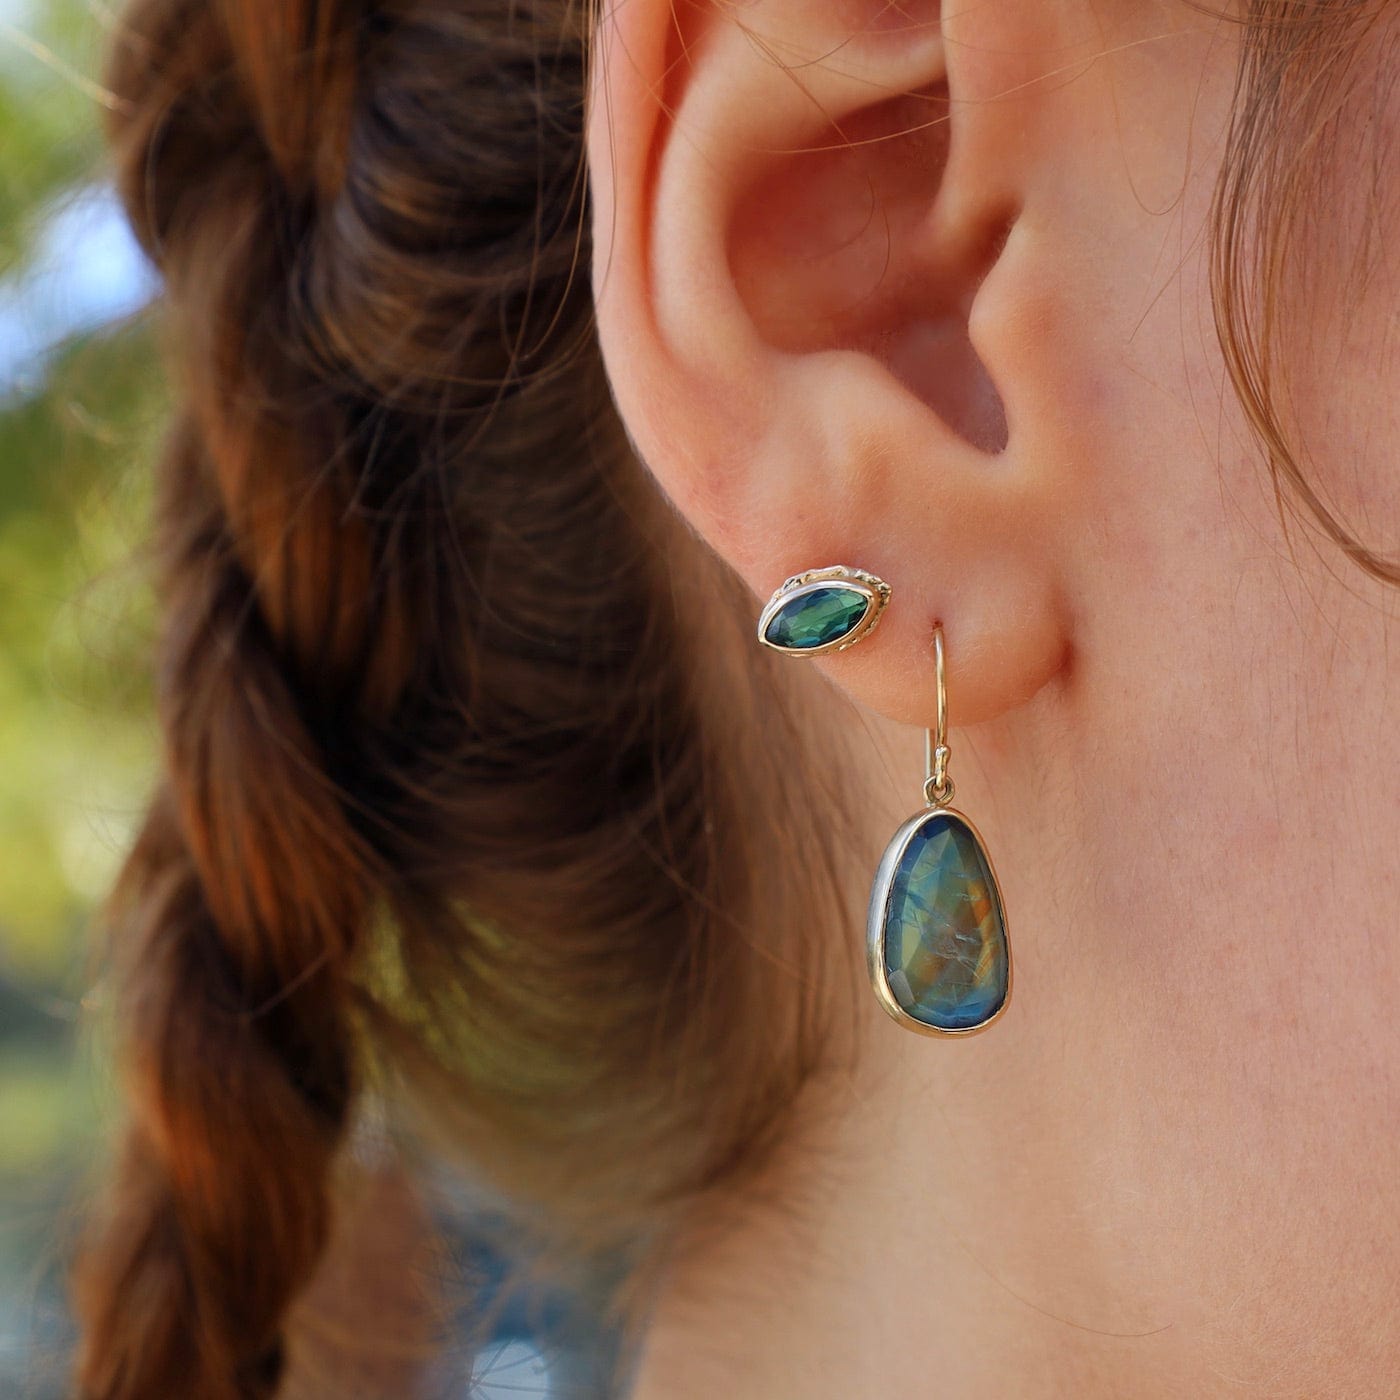 562 EAR-14K 14K Gold Post Earrings with Marquise Inverted Blue Green Tourmaline